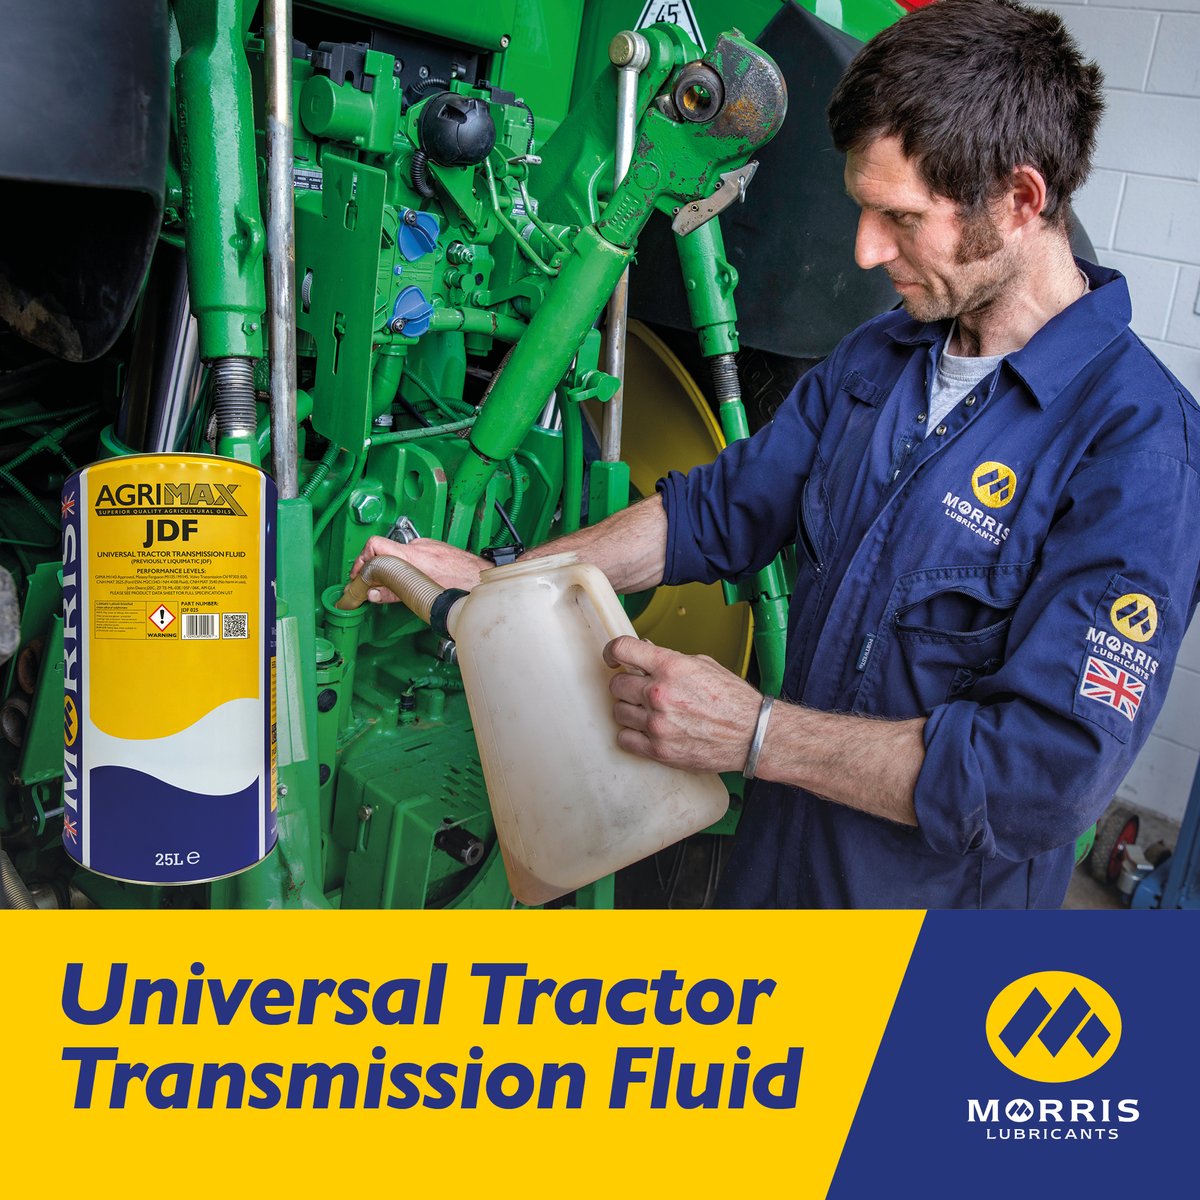 @Morrisoil Agrimax JDF is a Universal Tractor Transmission Fluid formulated with quality oils & specialised additives for use in a wide variety of agricultural vehicles. @guymartinracing knows only quality oils will do for his tractors. Read more here: ow.ly/TnlN50RatMf